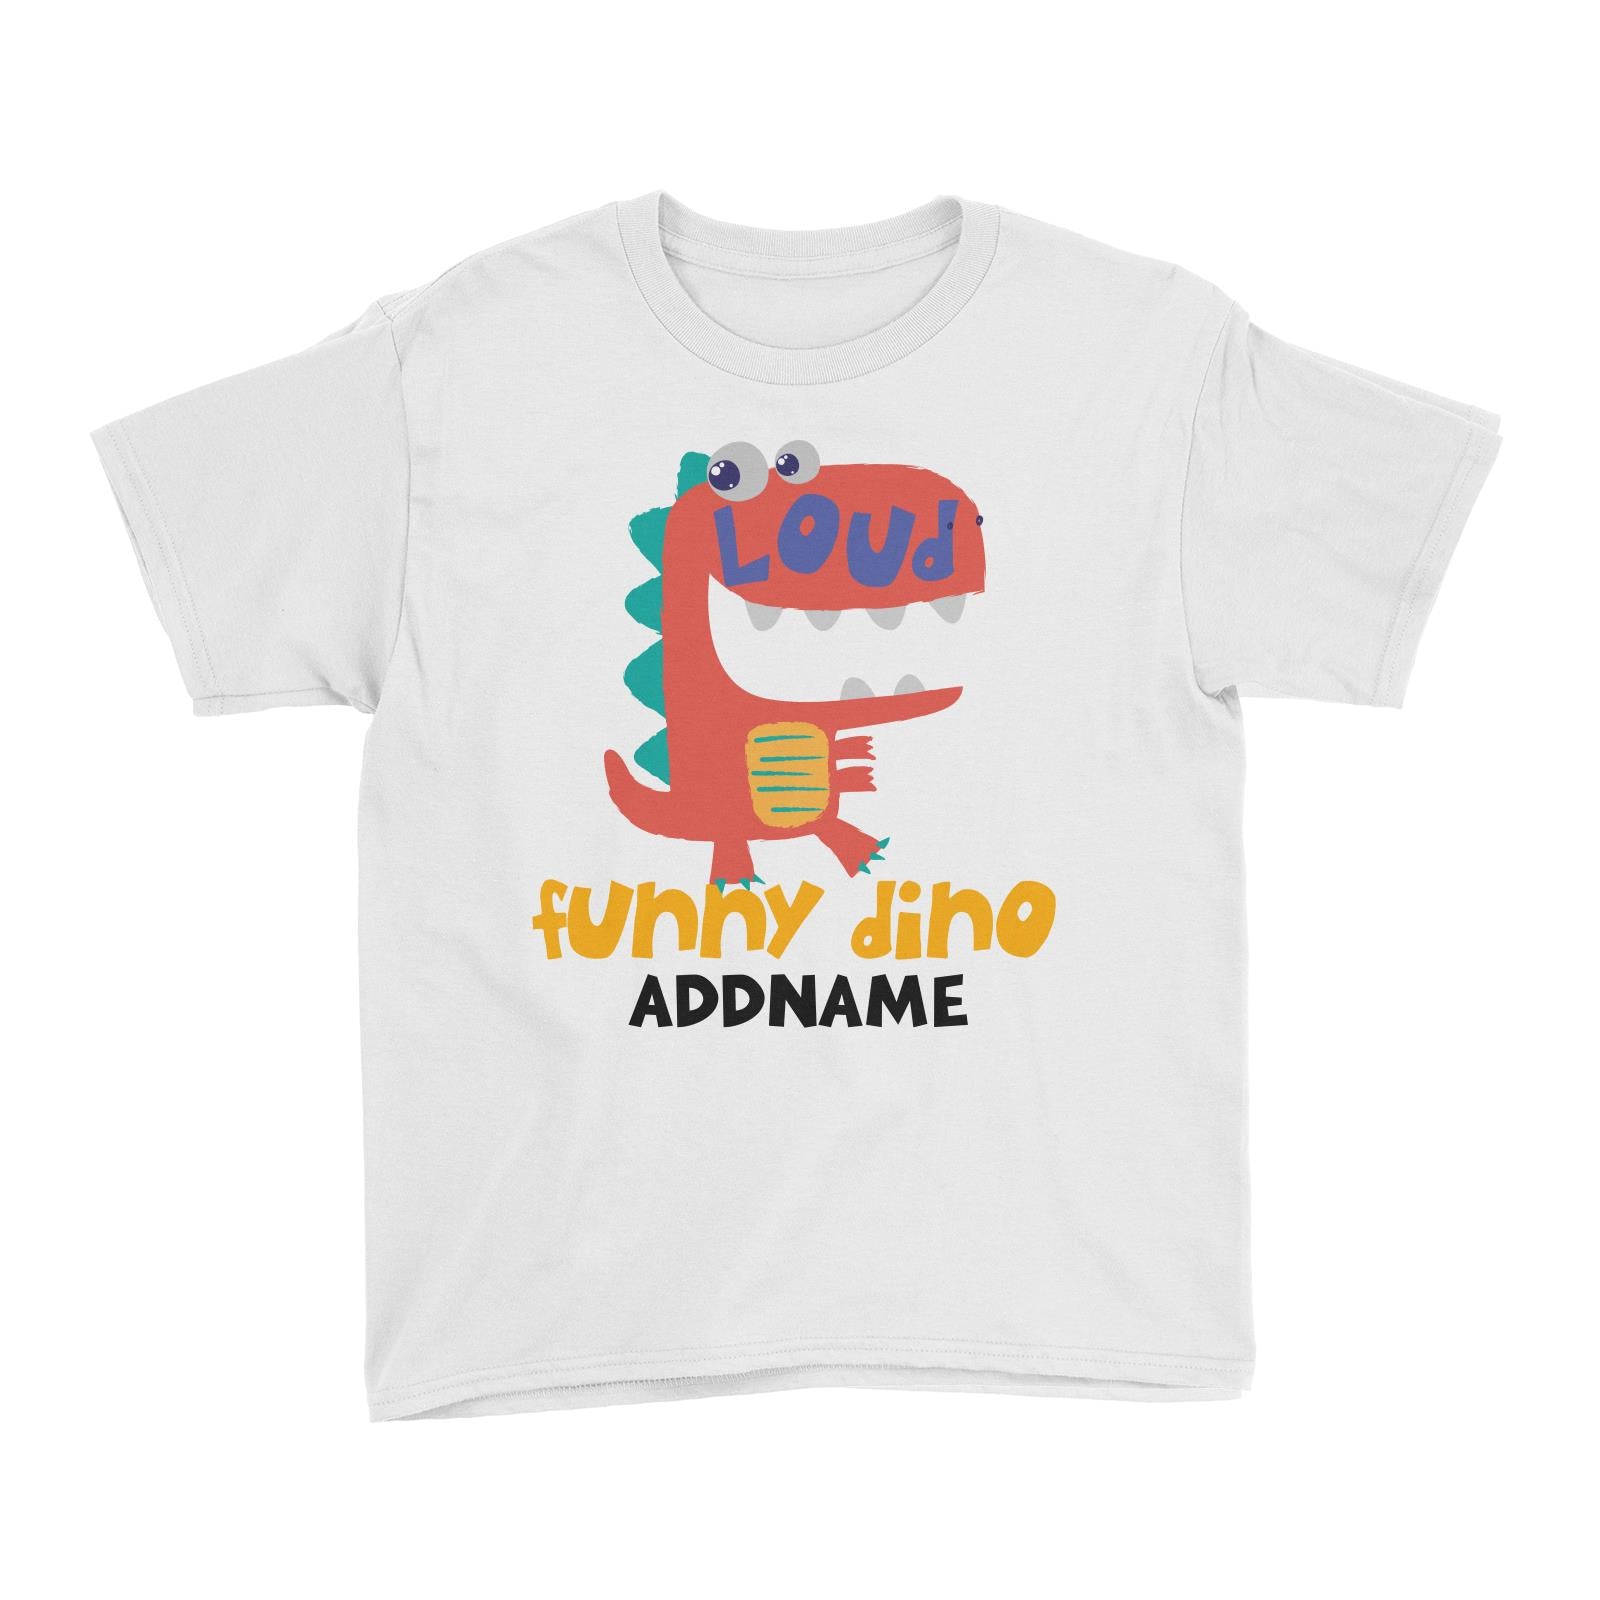 Loud Funny Dino Addname White Kid's T-Shirt